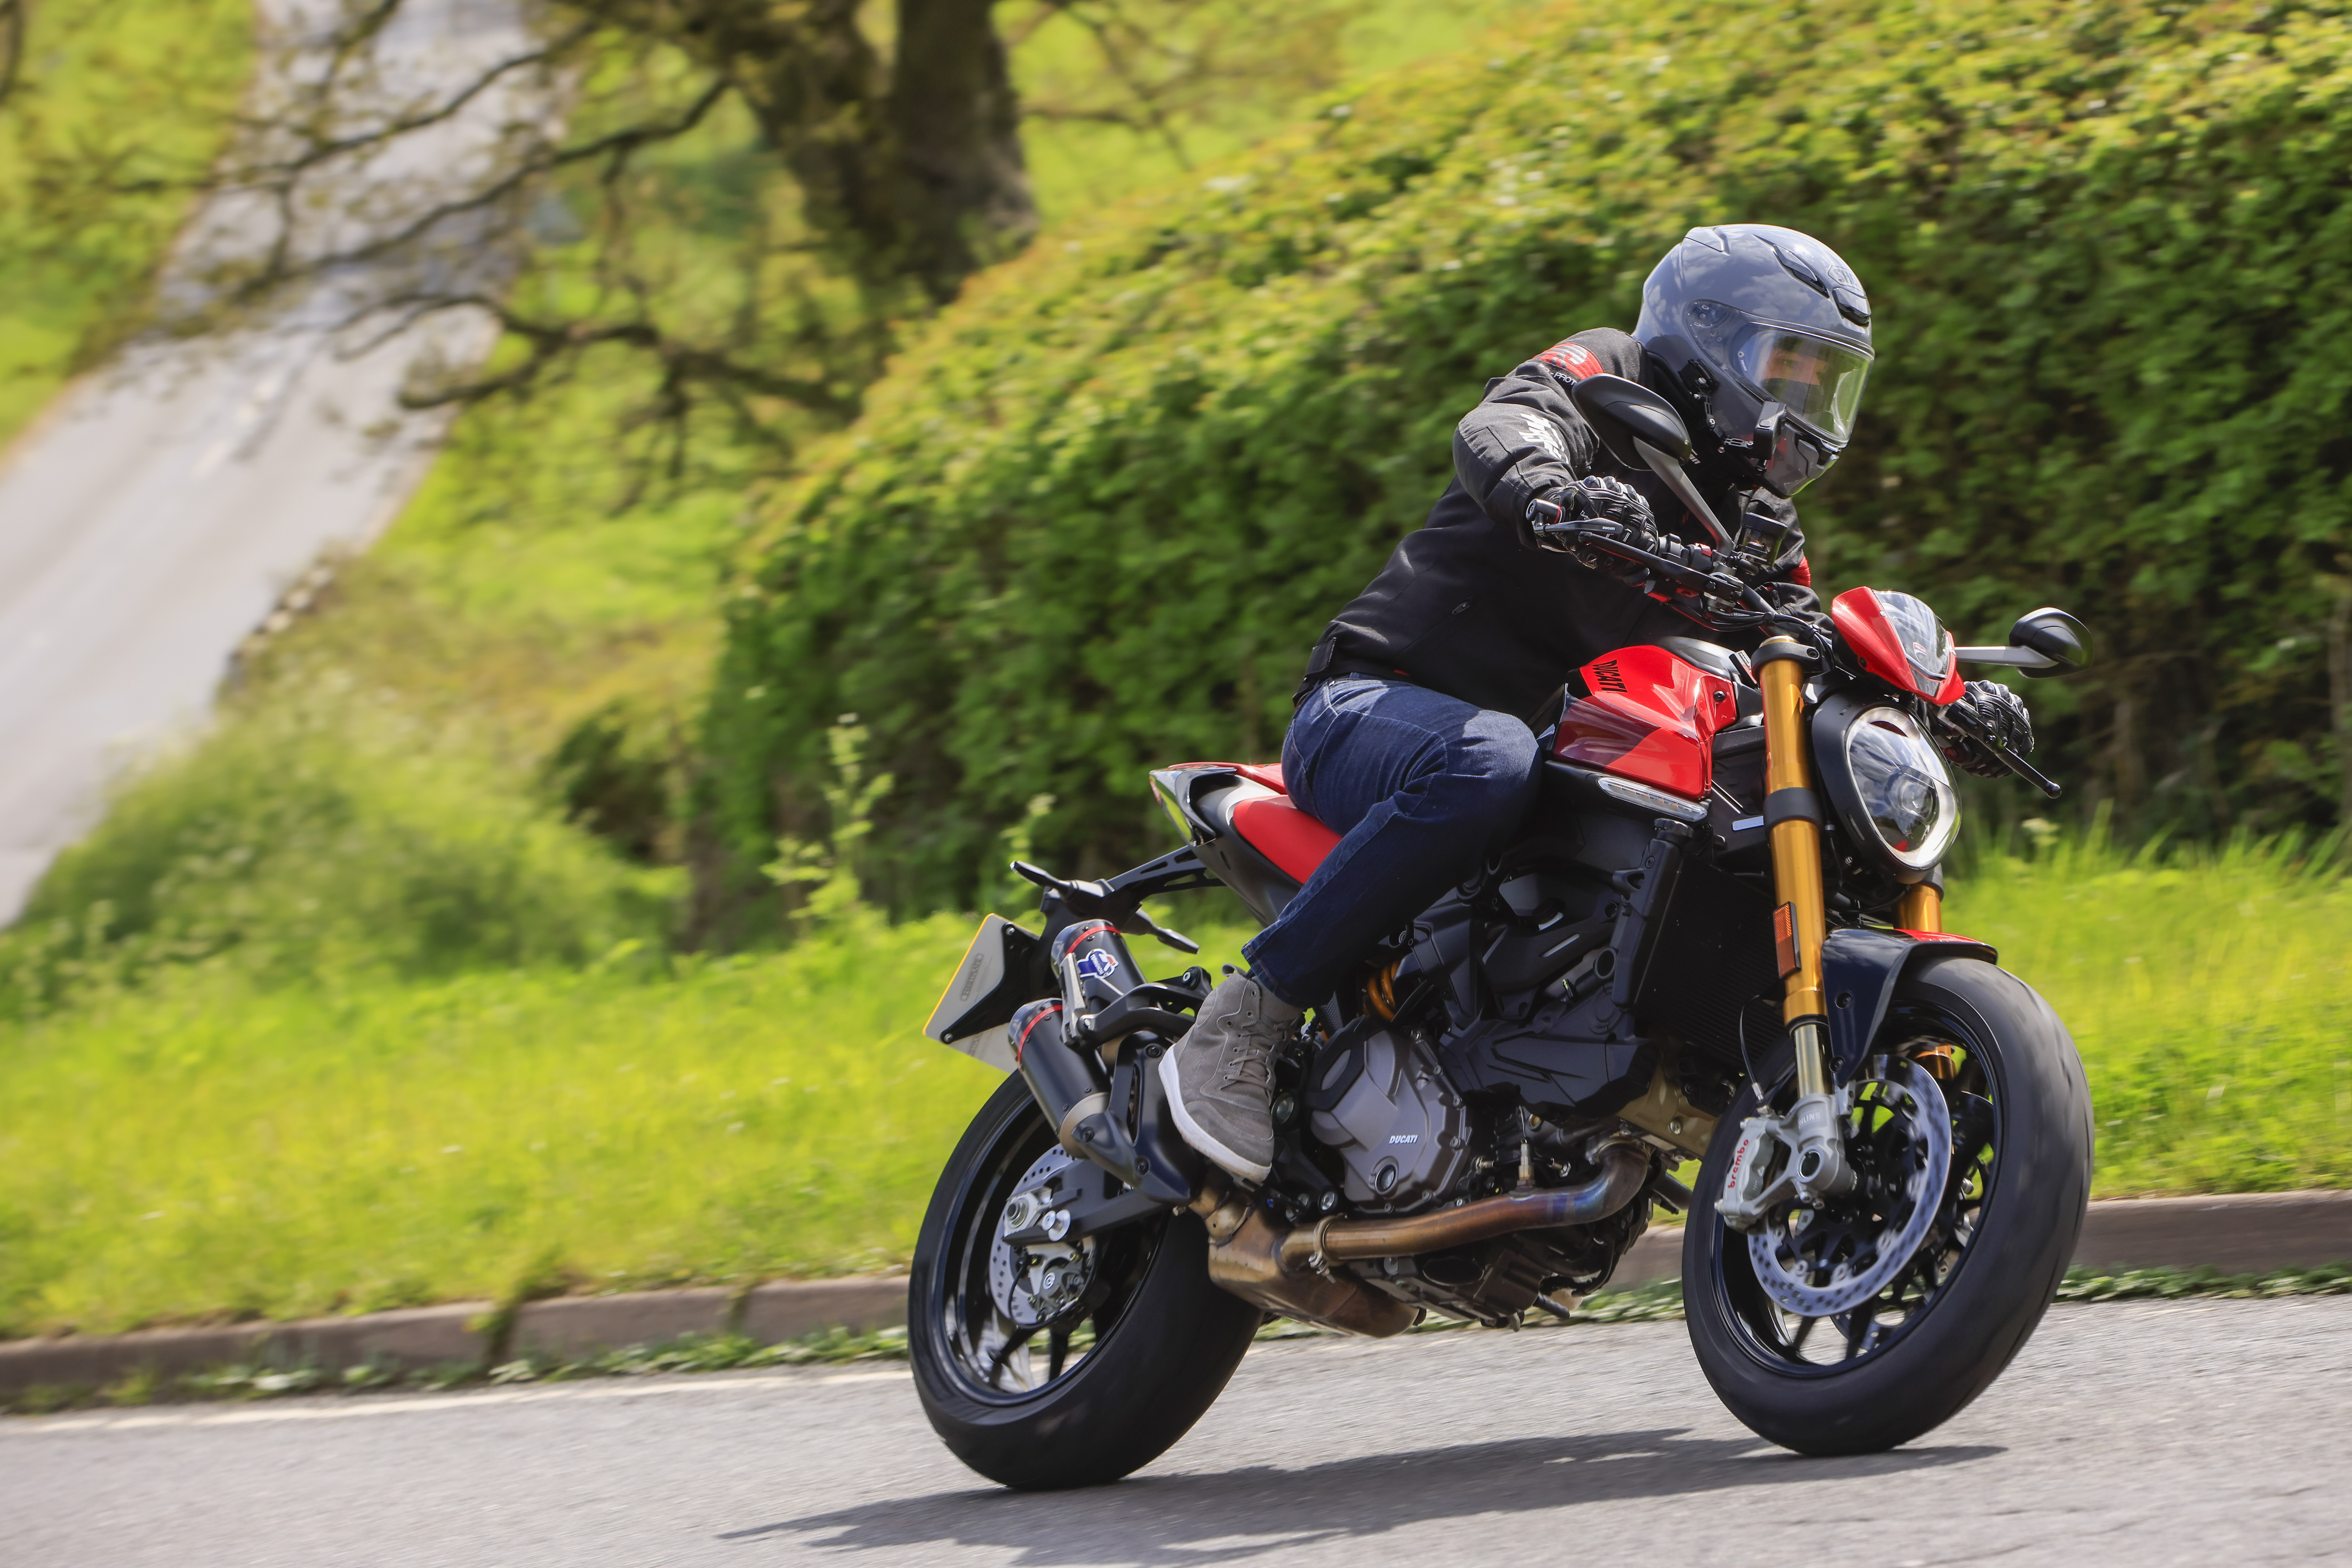 2023 Ducati Monster SP review - Alex riding in the UK